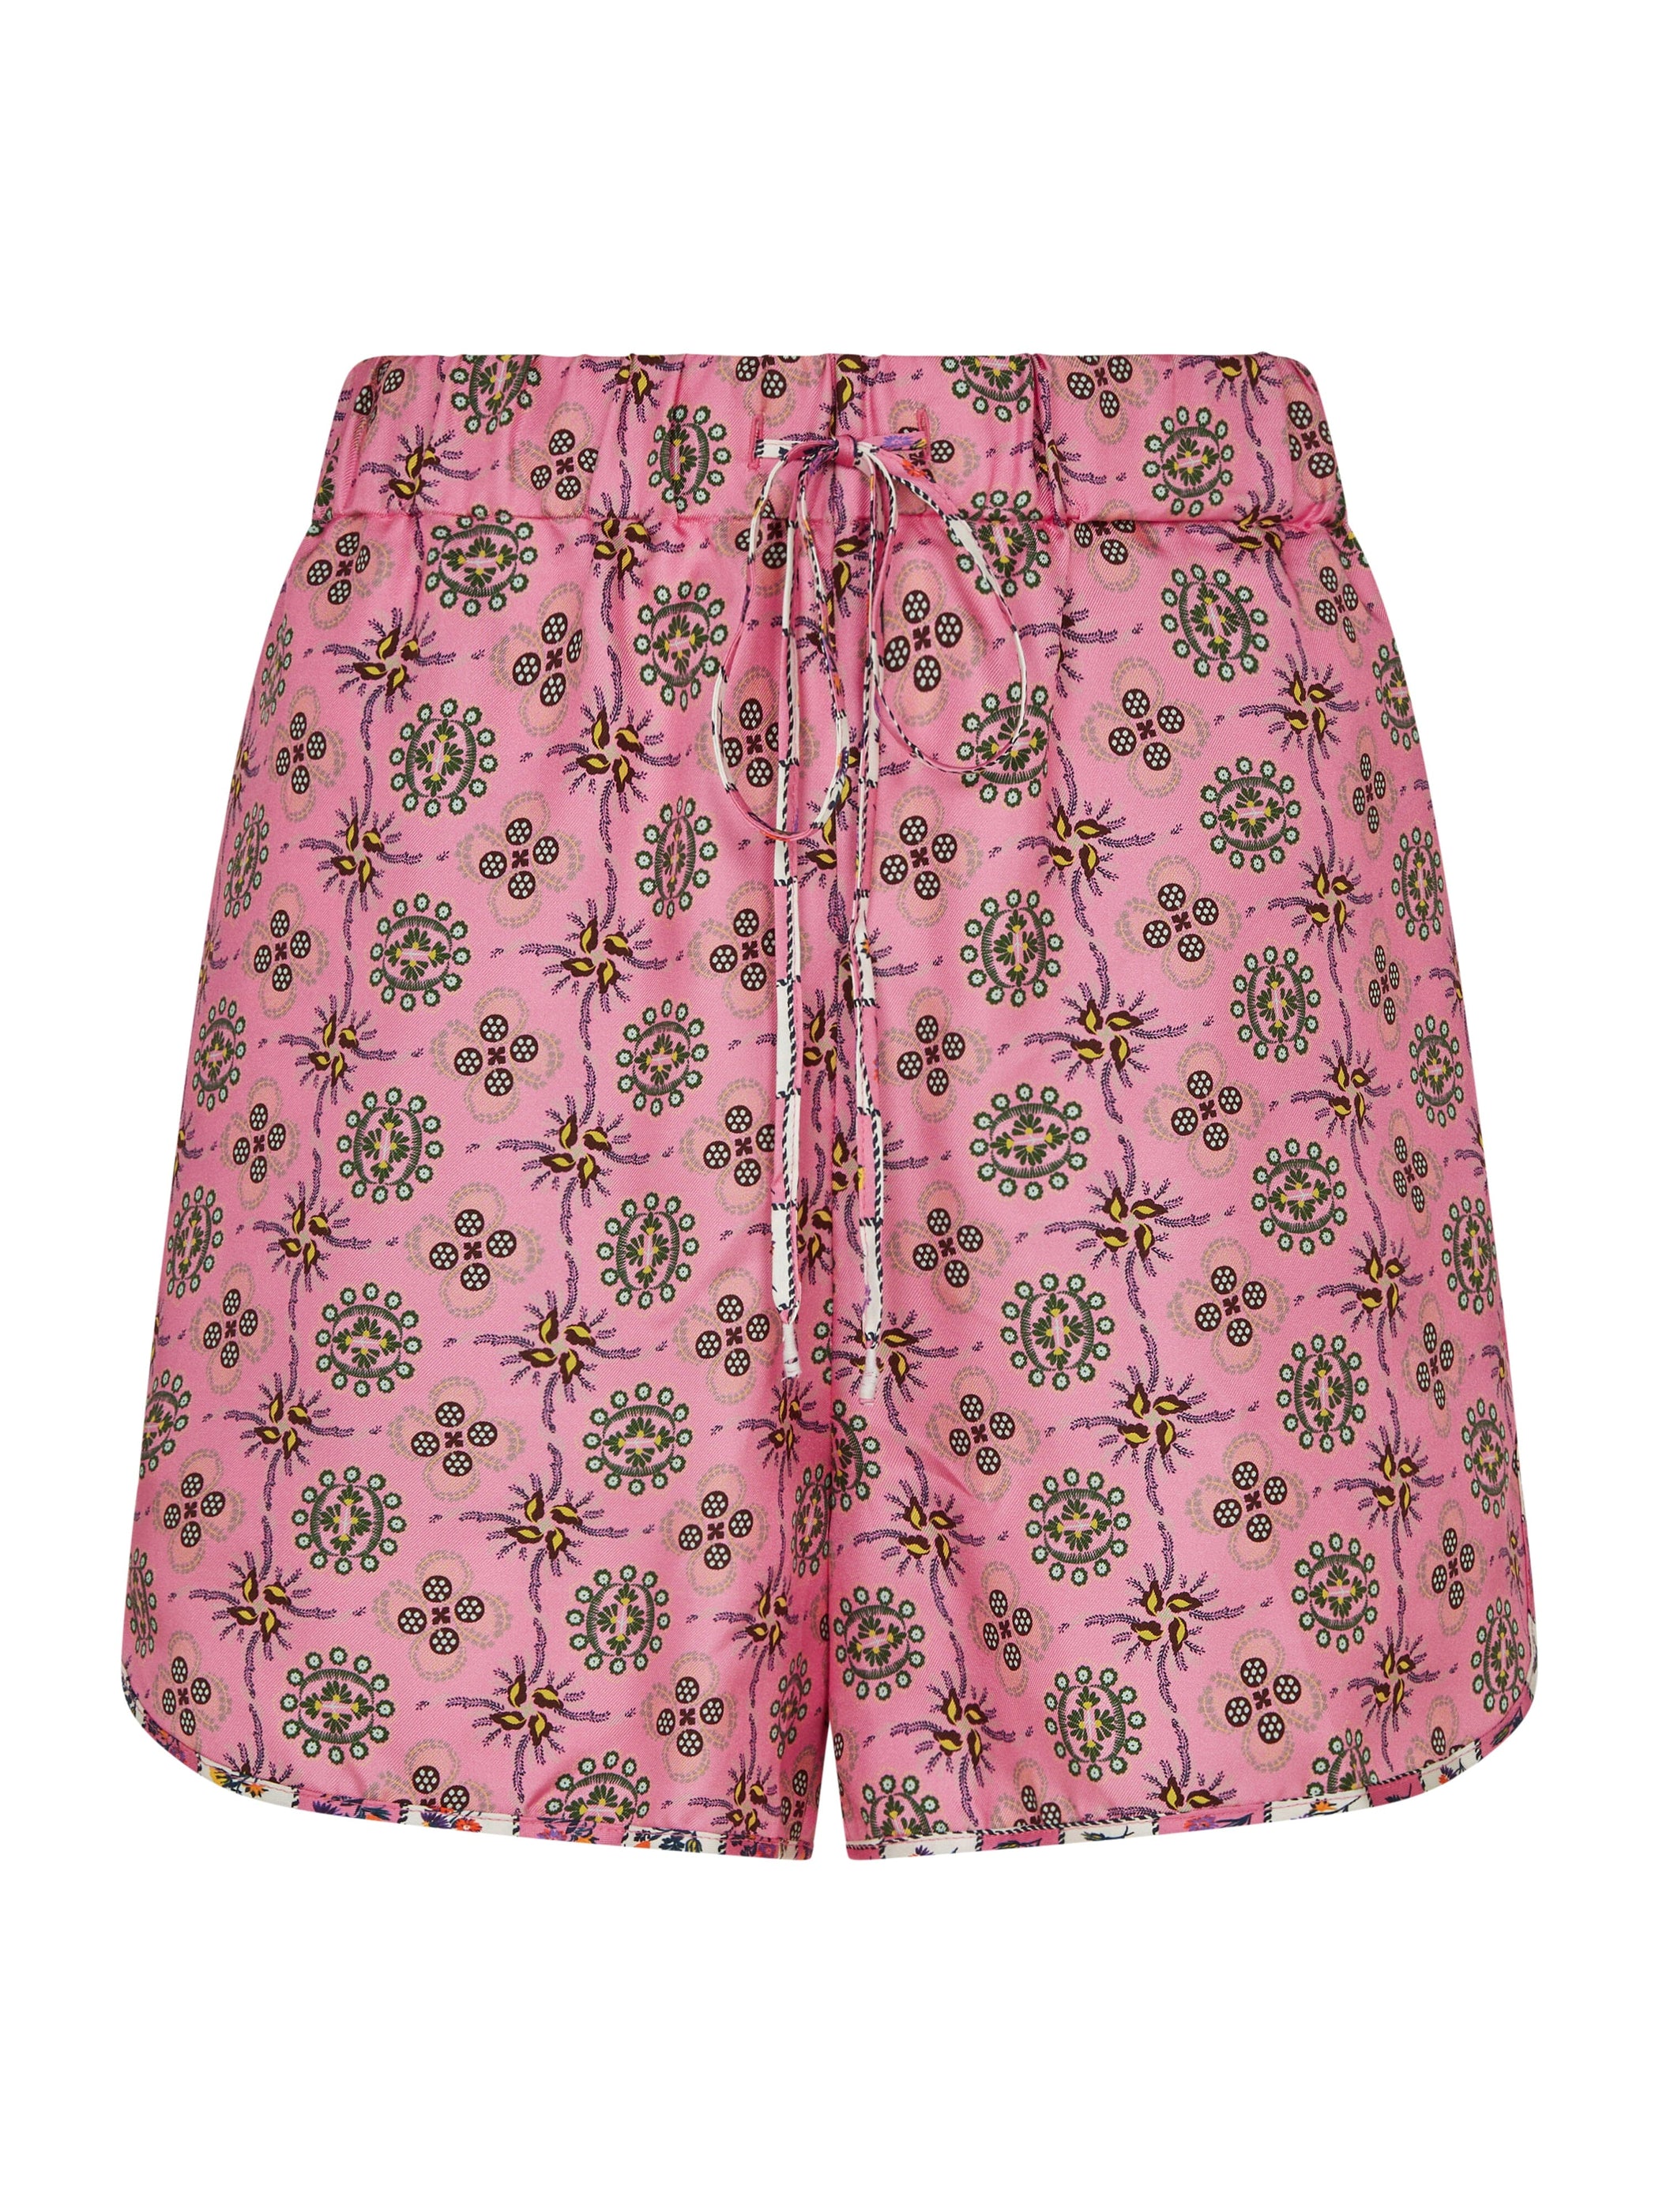 Paige Shorts in Thistle print